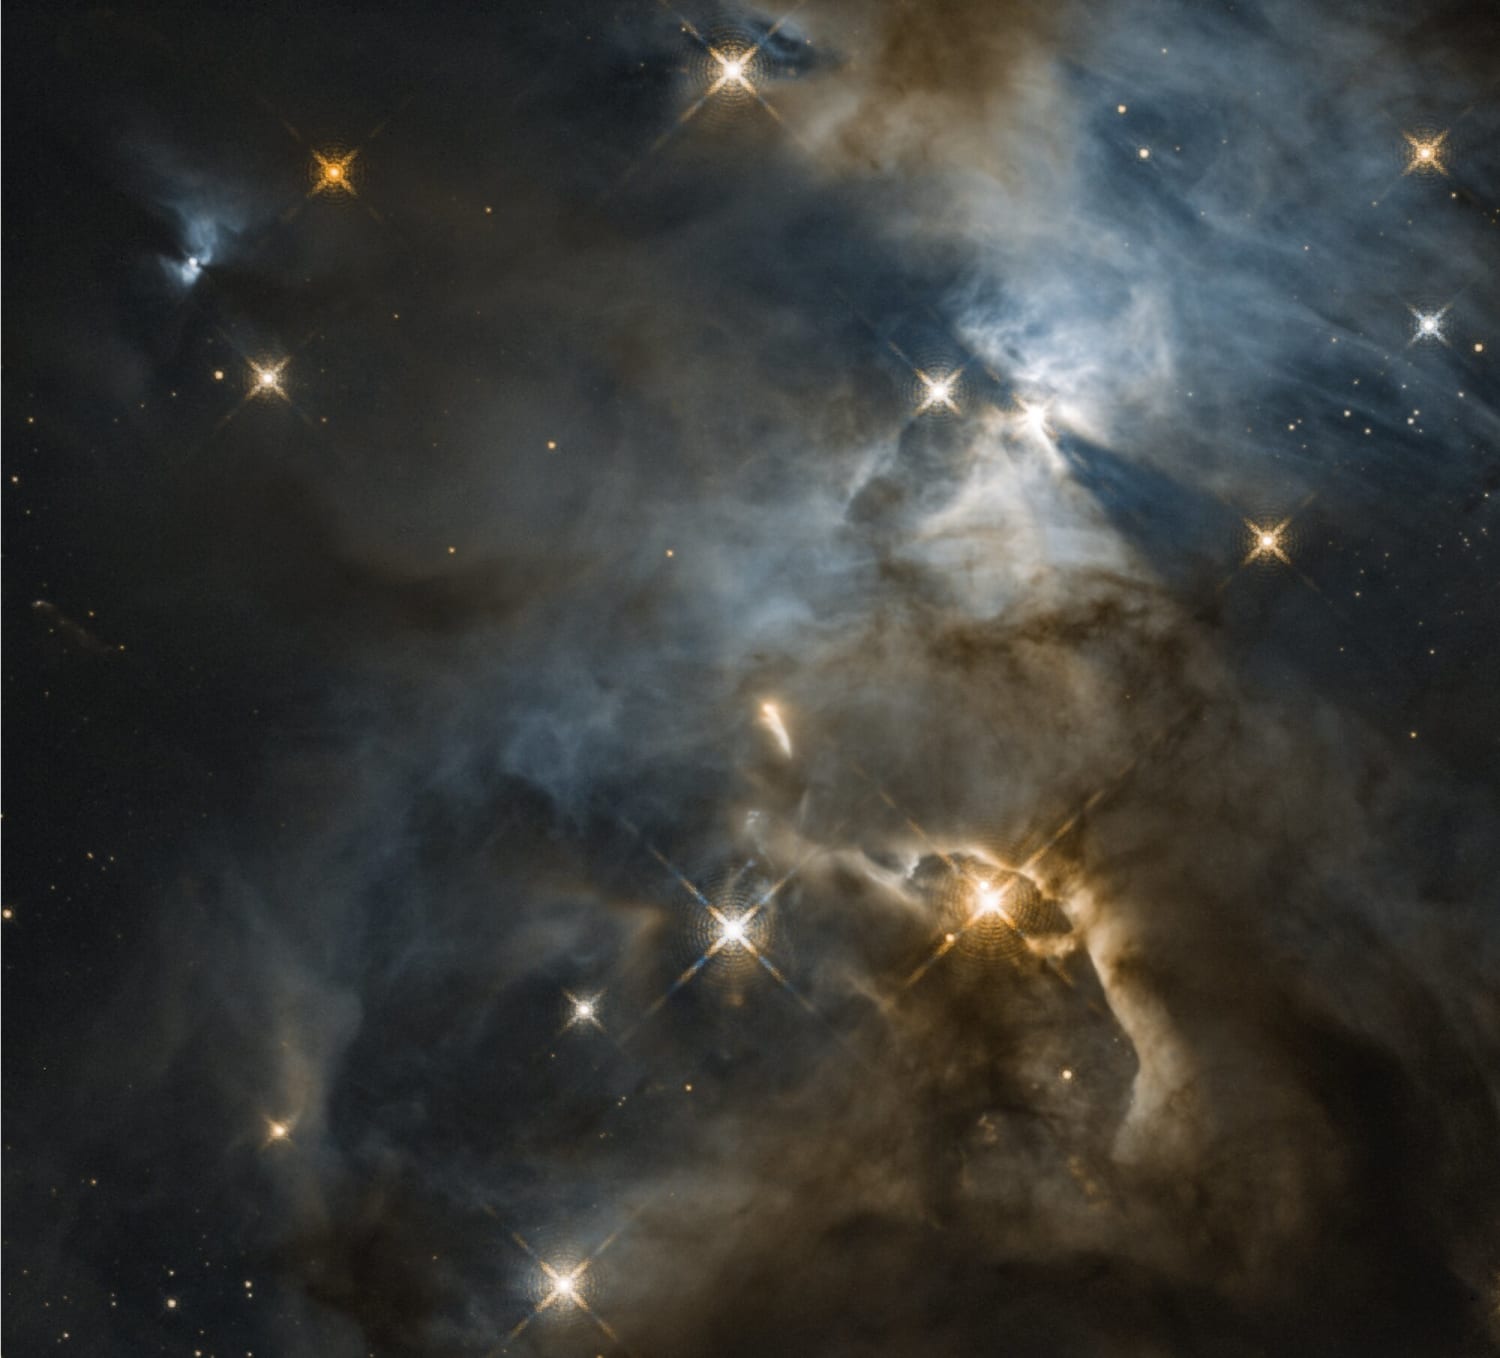 Hubble sees a cosmic flapping 'Bat Shadow'